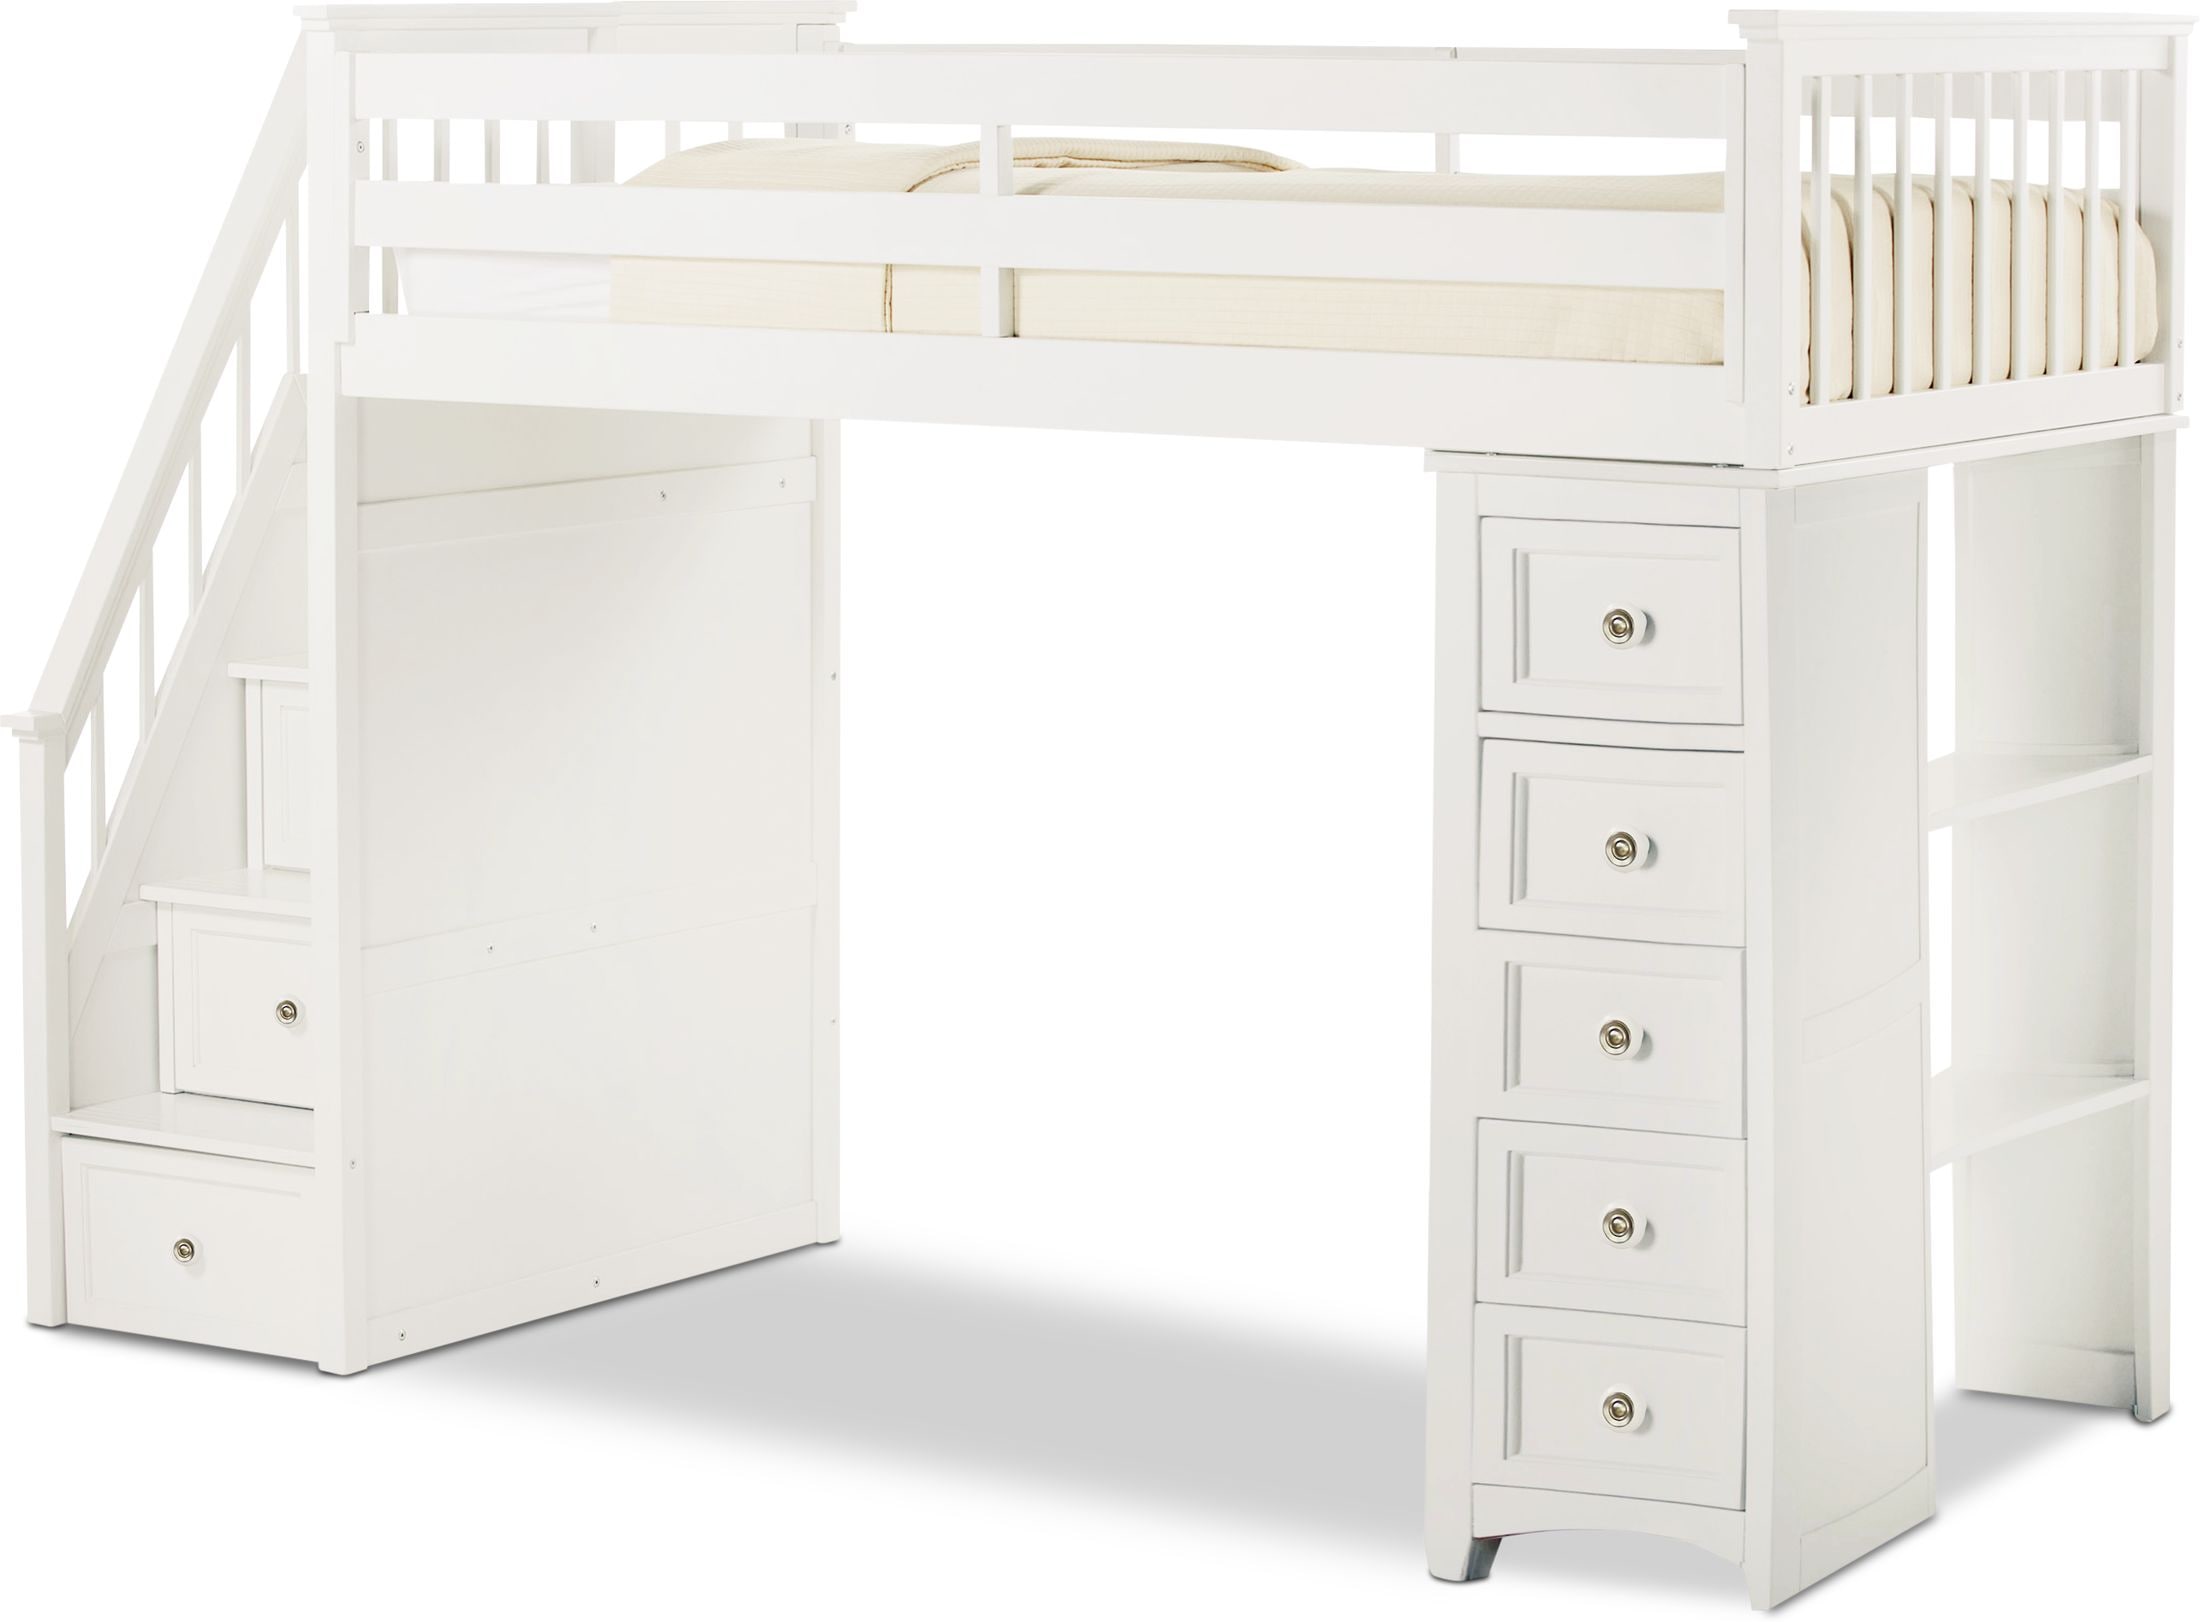 Flynn Loft Bed With Storage Stairs And, Embrace Twin Loft Bed With Storage Steps